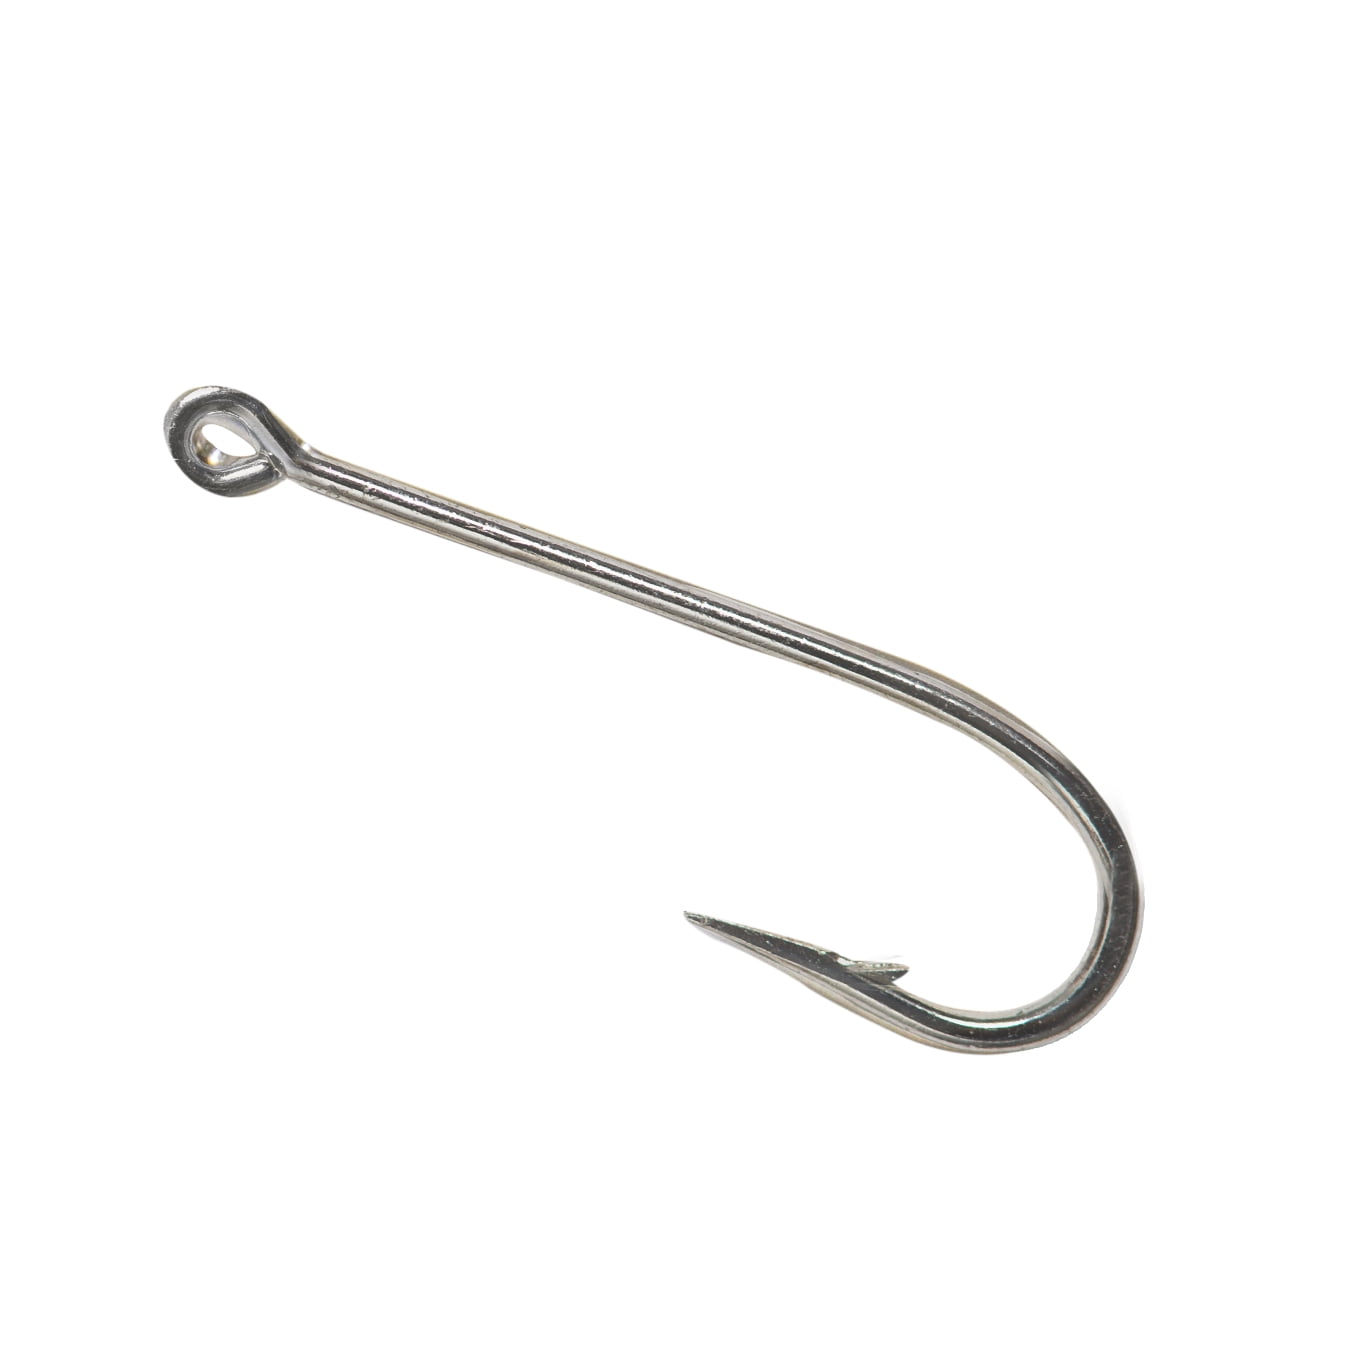 Details about   Freshwater And Saltwater 1# Gap Fishing O'shaughnessy Hooks 9260 Black 50 Pieces 